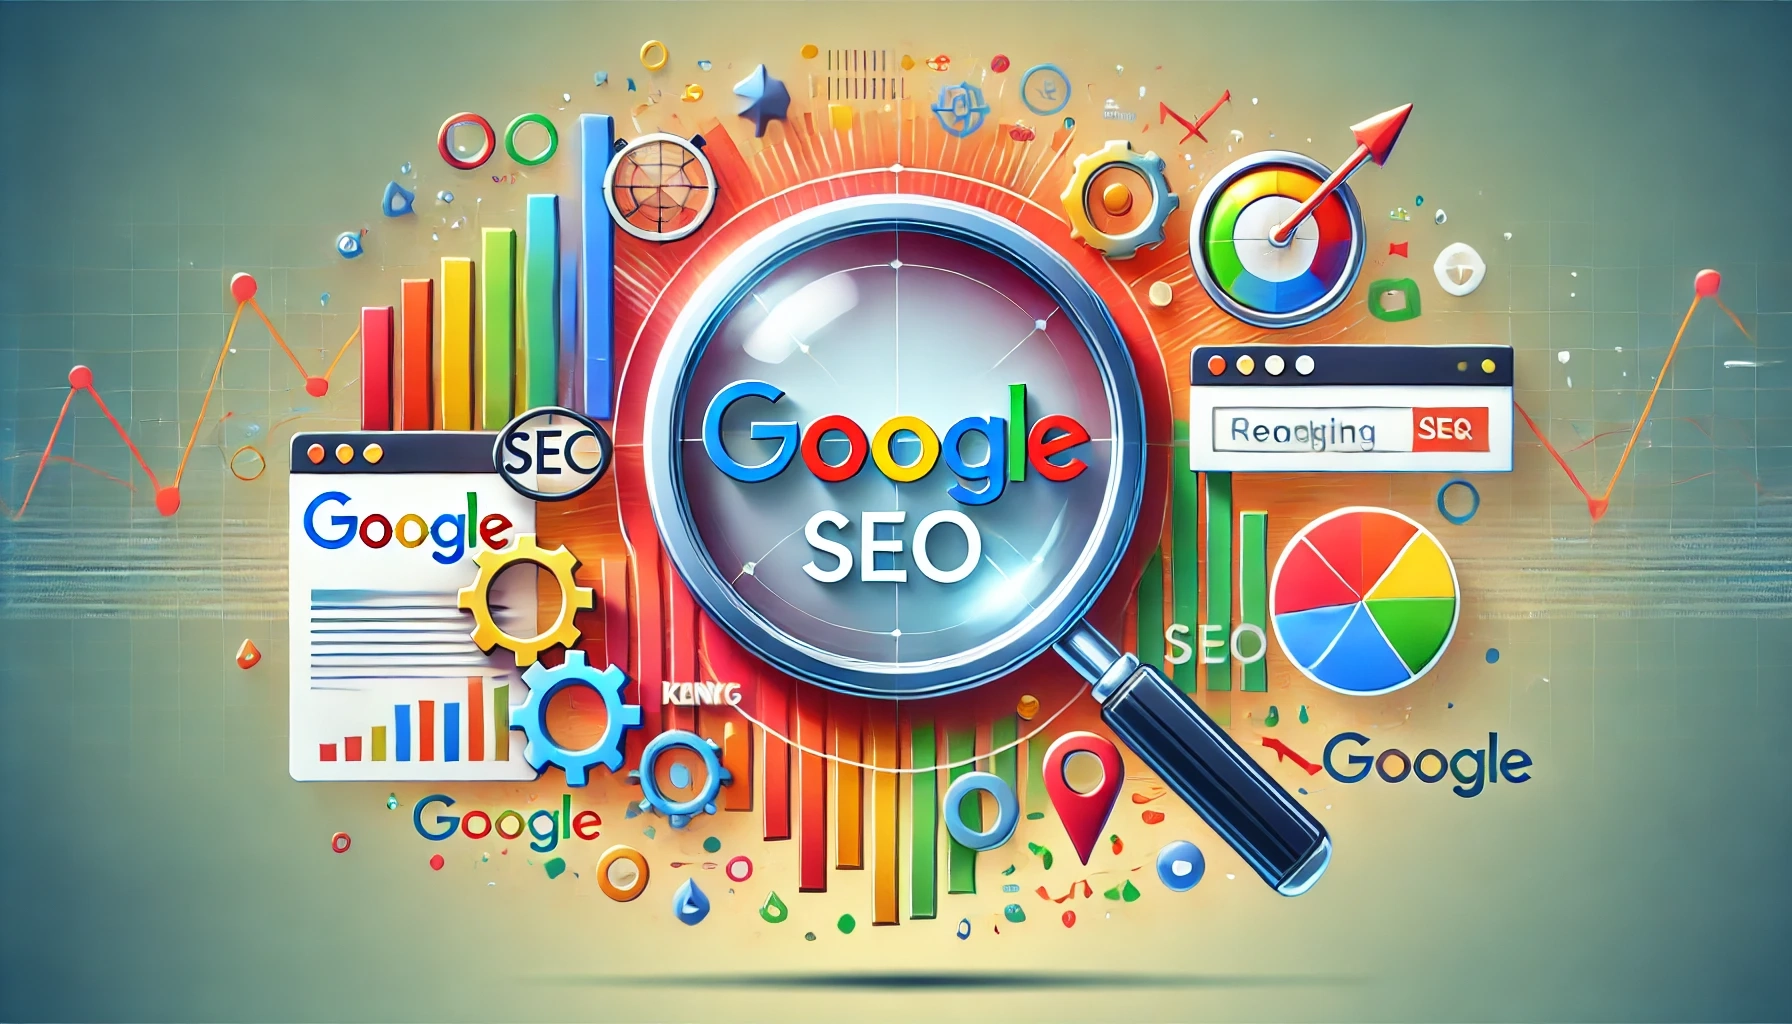 Google SEO: Learn How to Optimize Your Site